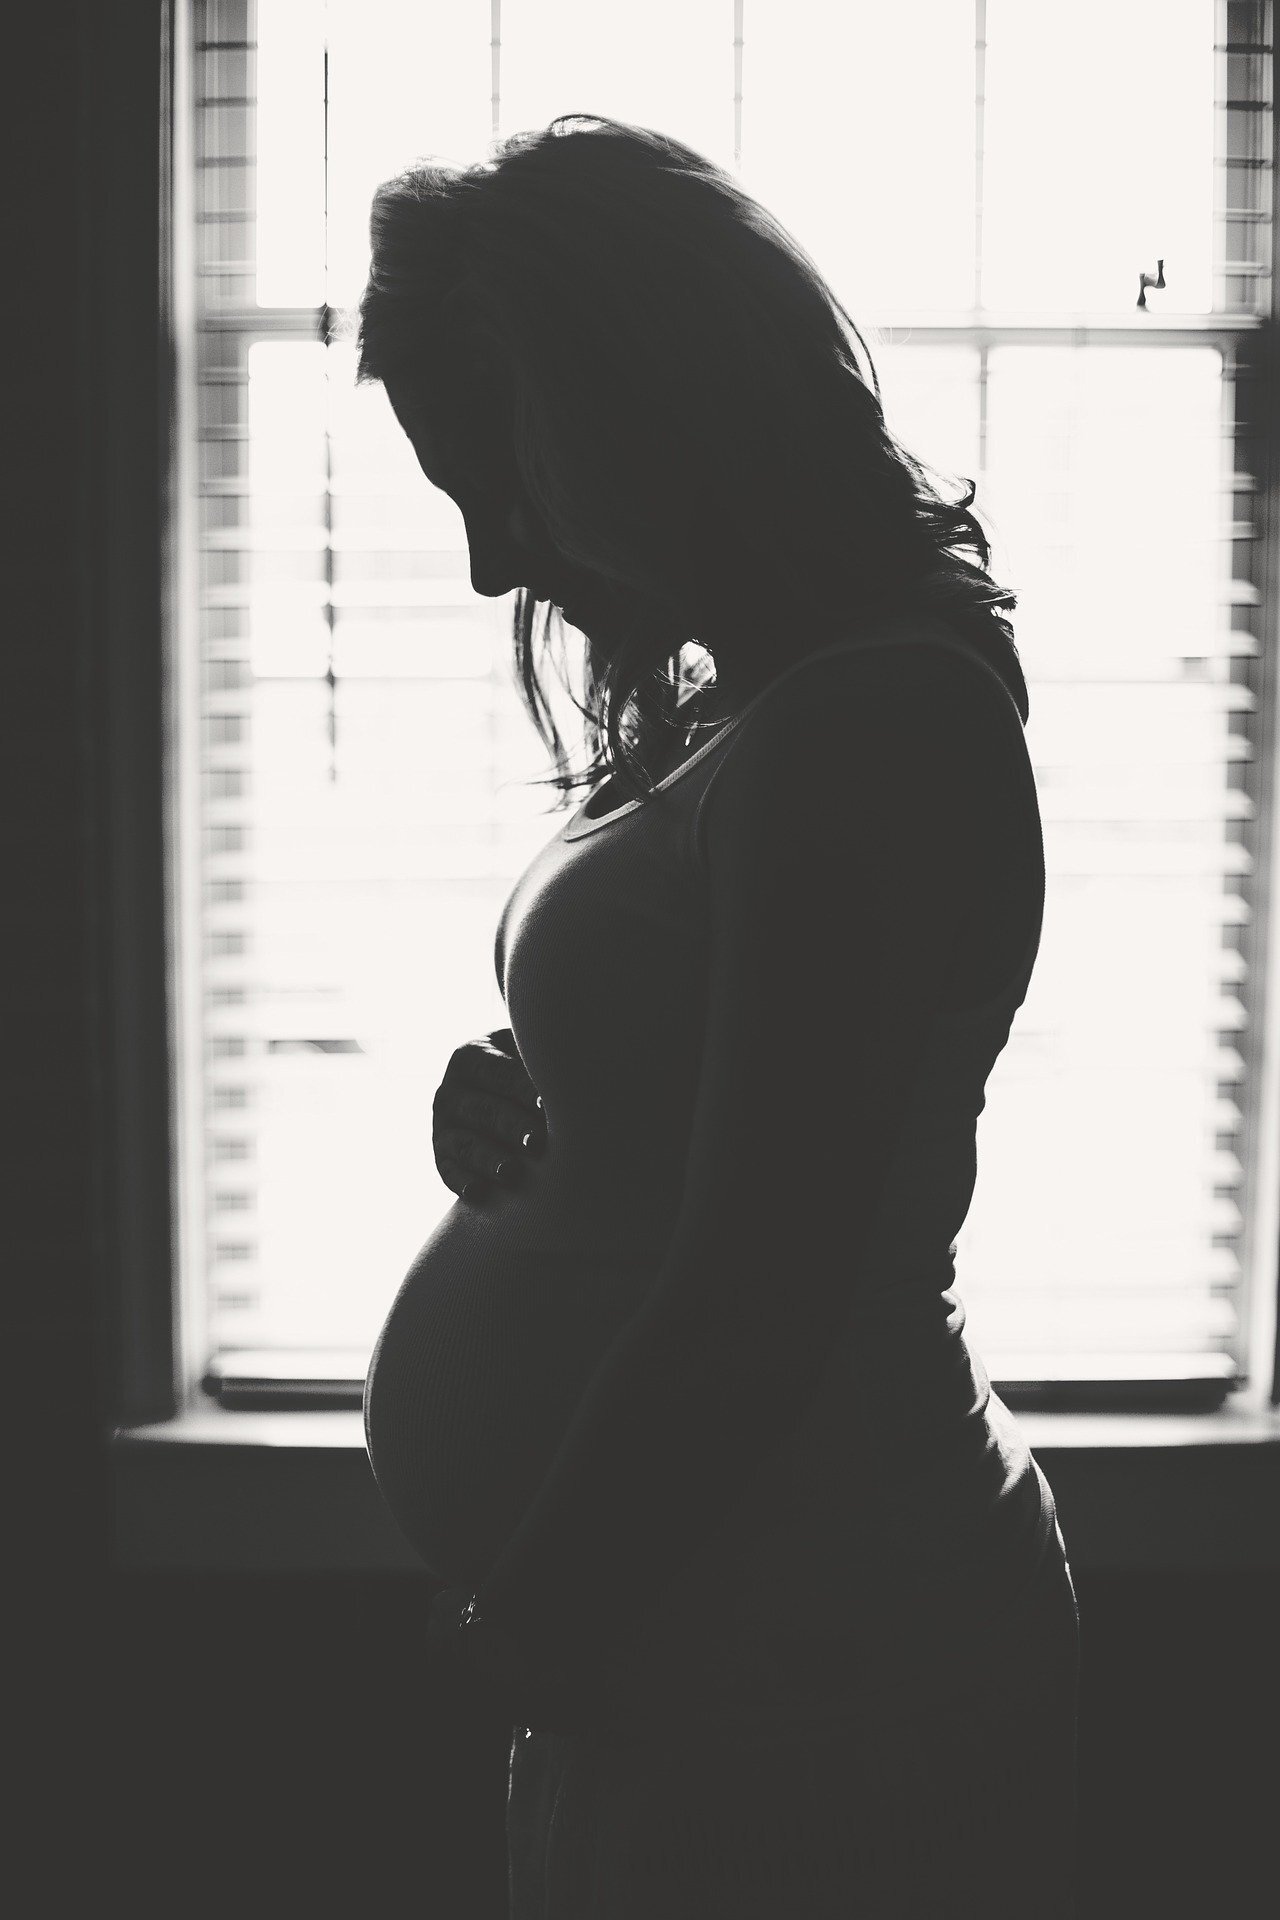 Welcome news for pregnant women with type 2 diabetes